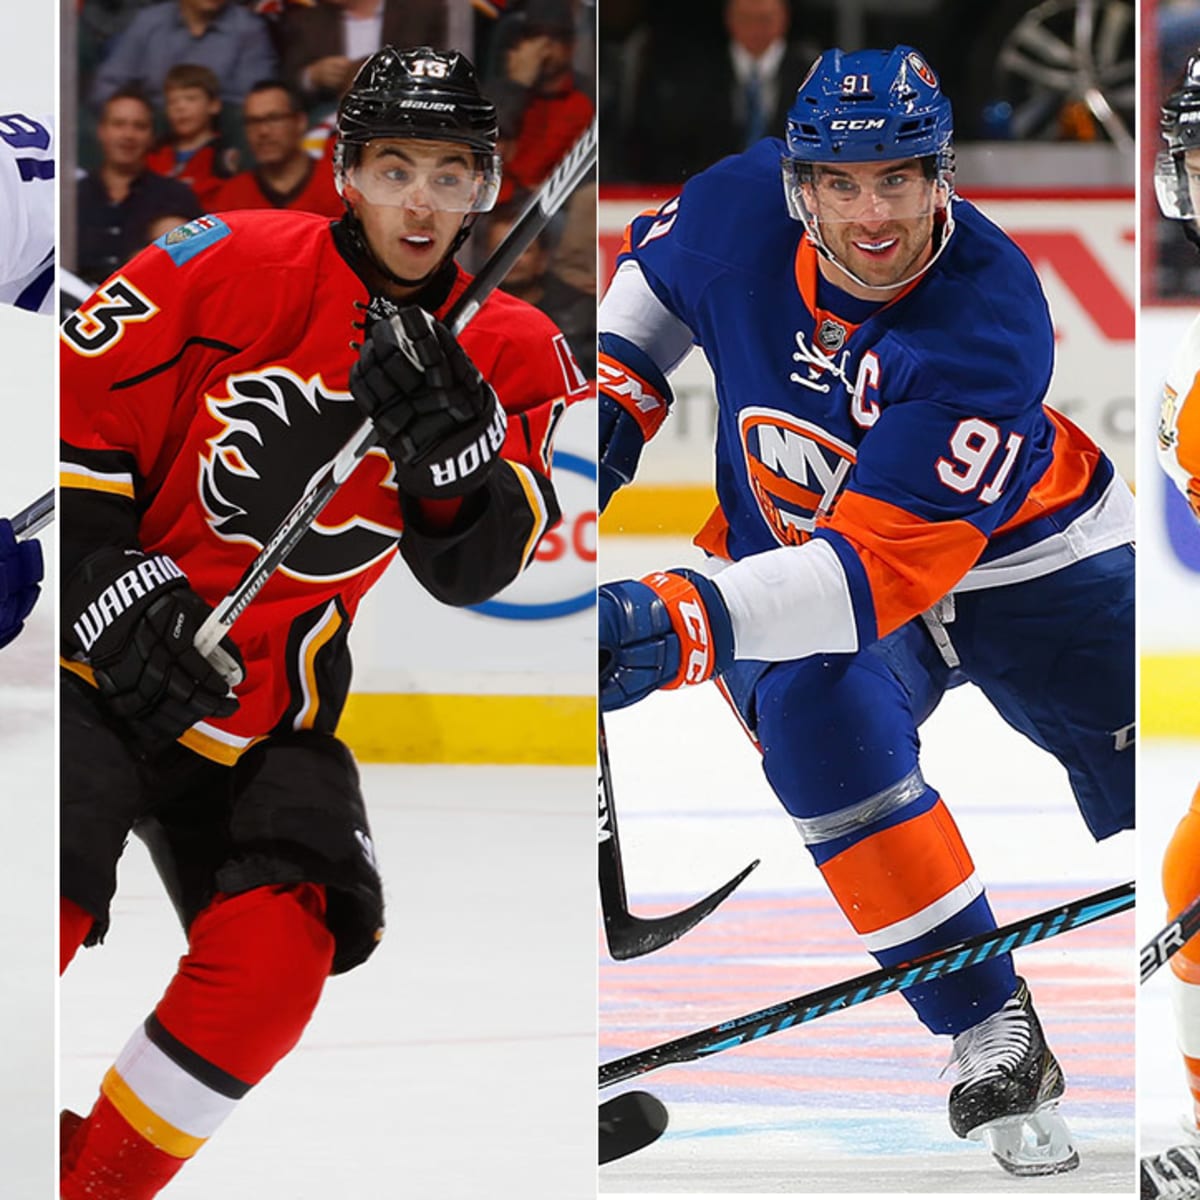 Giroux, Gostisbehere, and Bellemare headed to World Cup of Hockey